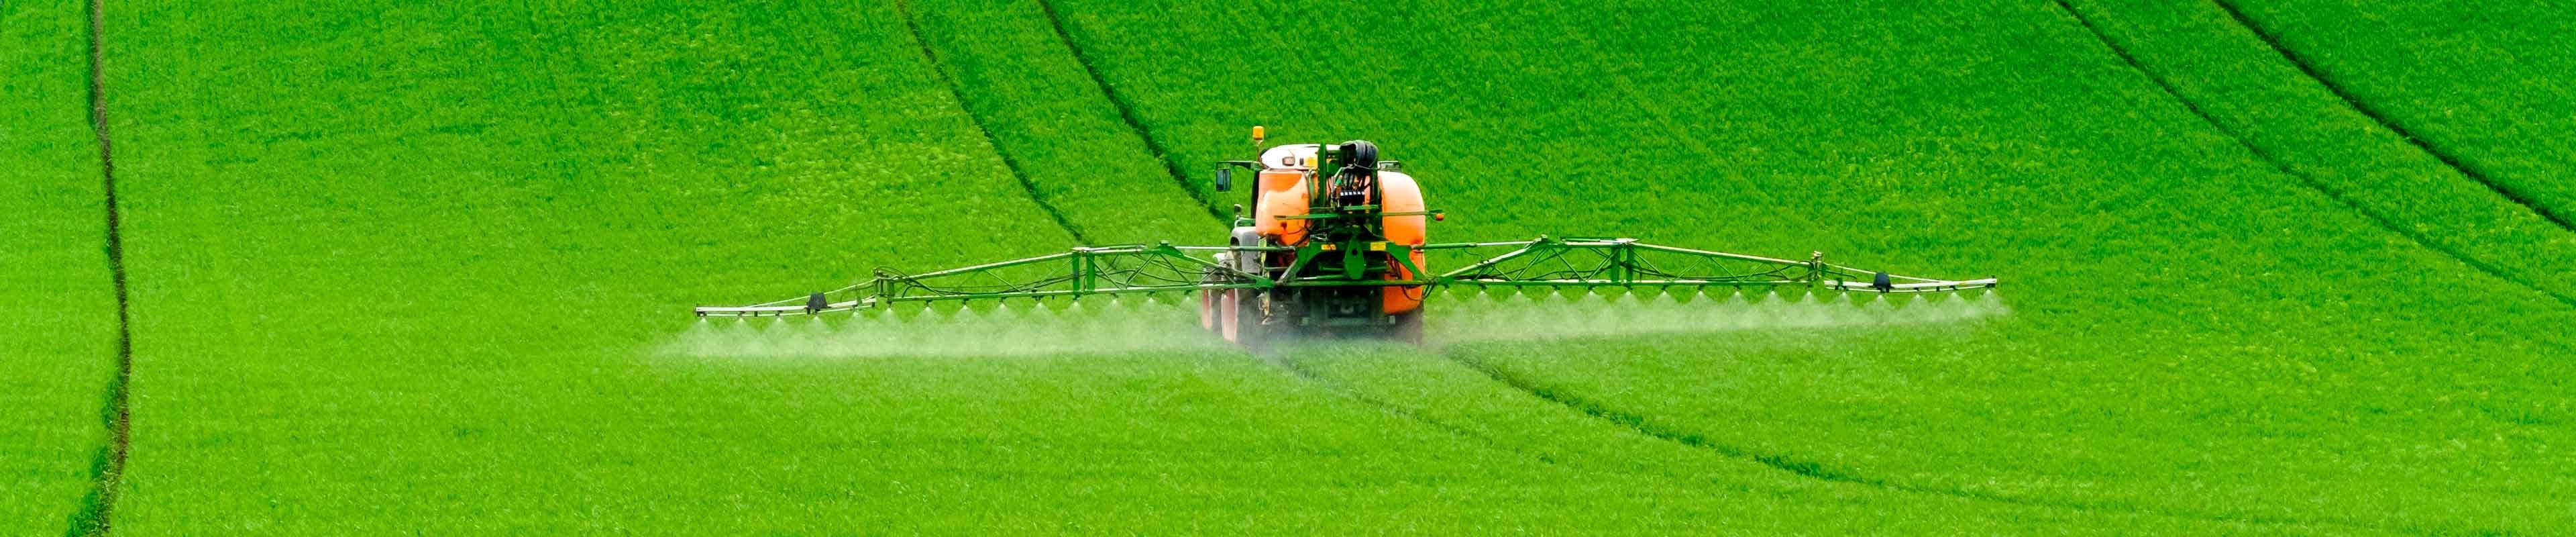 Image of a pesticide spraying  farm implement spraying crops.